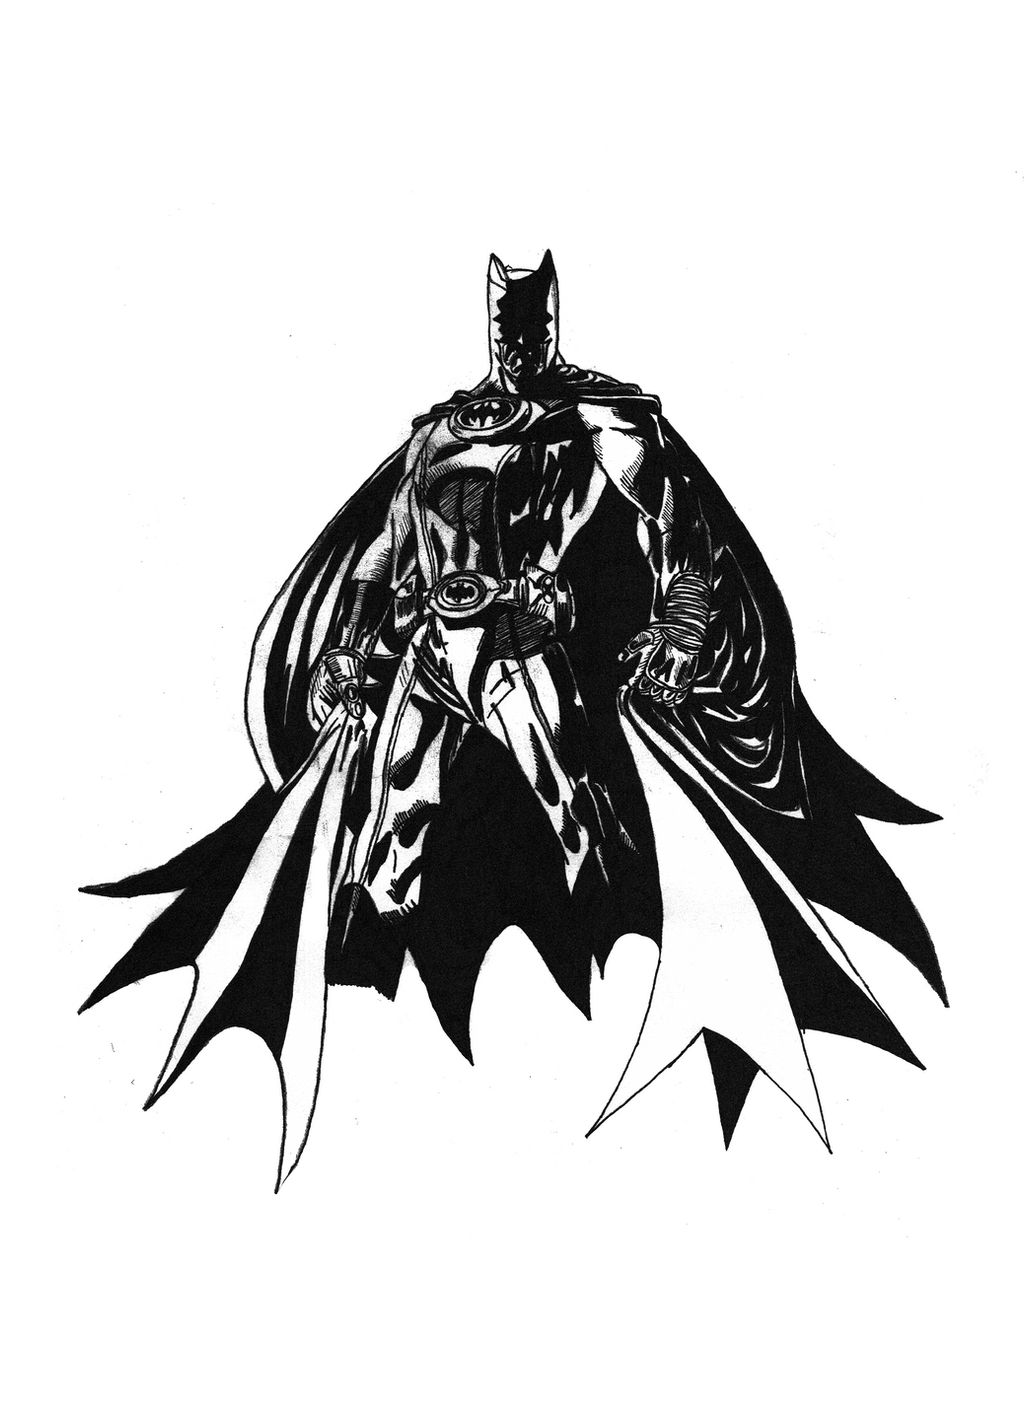 Batman Black and White Drawing by Scootaloooo on DeviantArt